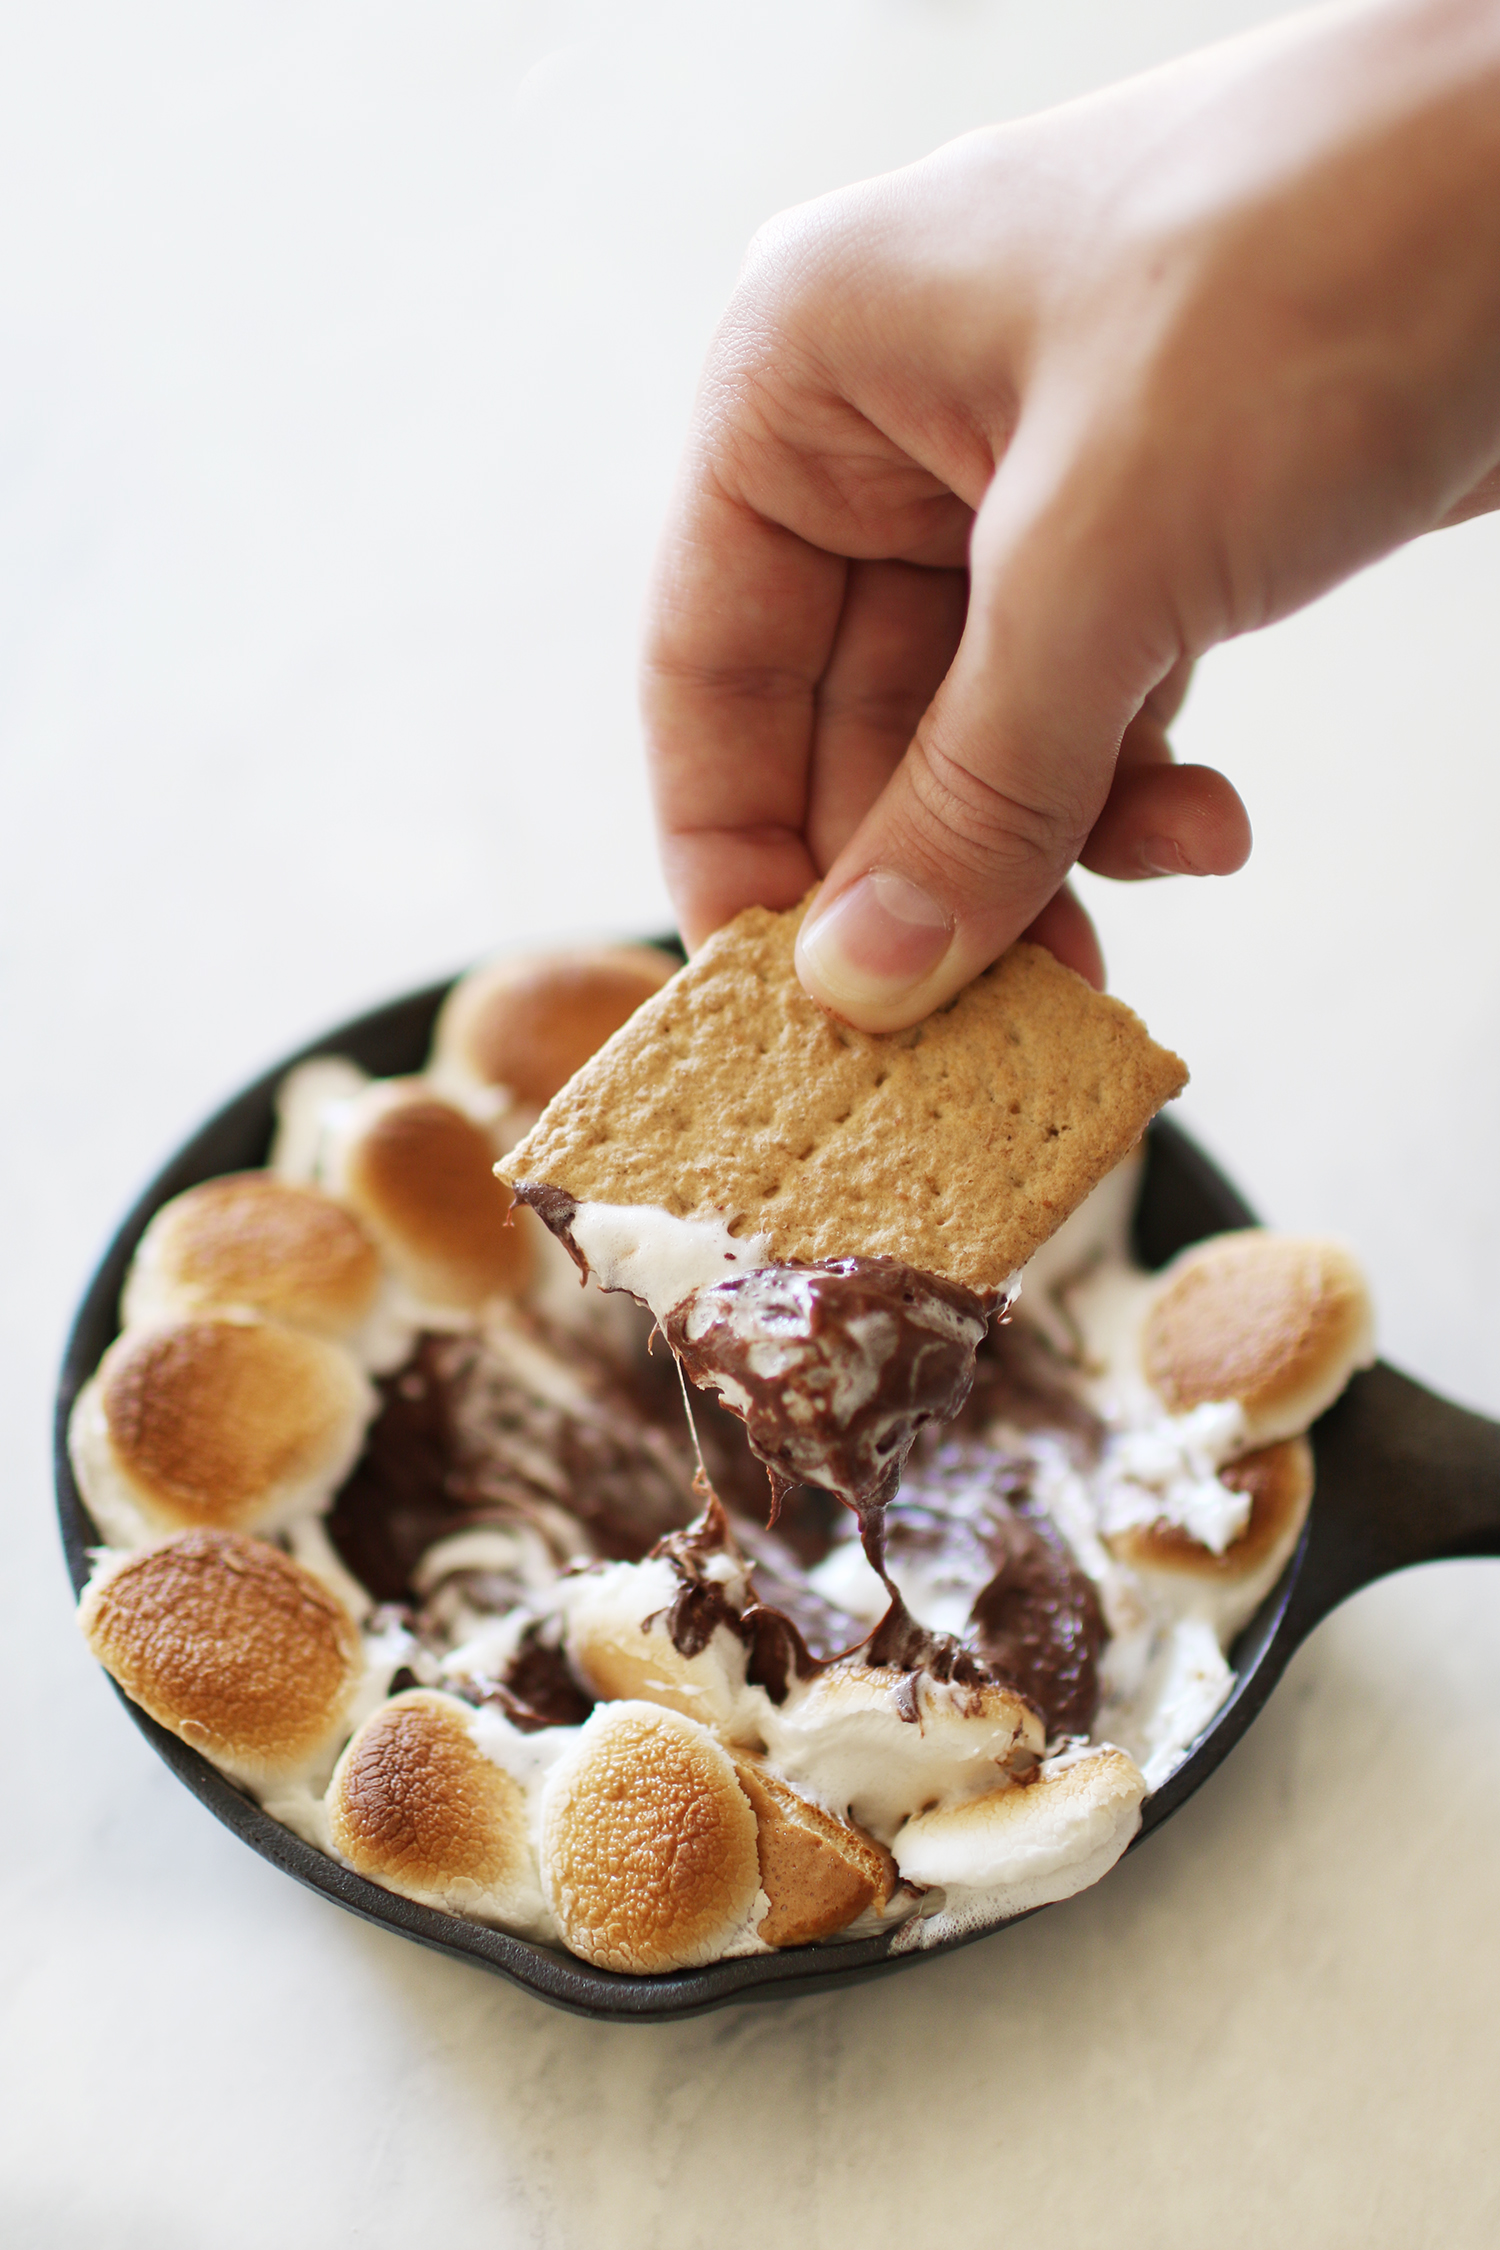 Quick and easy s'mores dip recipe on KaraLayne.com! The perfect dessert option for those cozy nights at home with the family! #DessertIdeas #EasyDessertIdeas #SmoresRecipe #SmoresDipRecipe